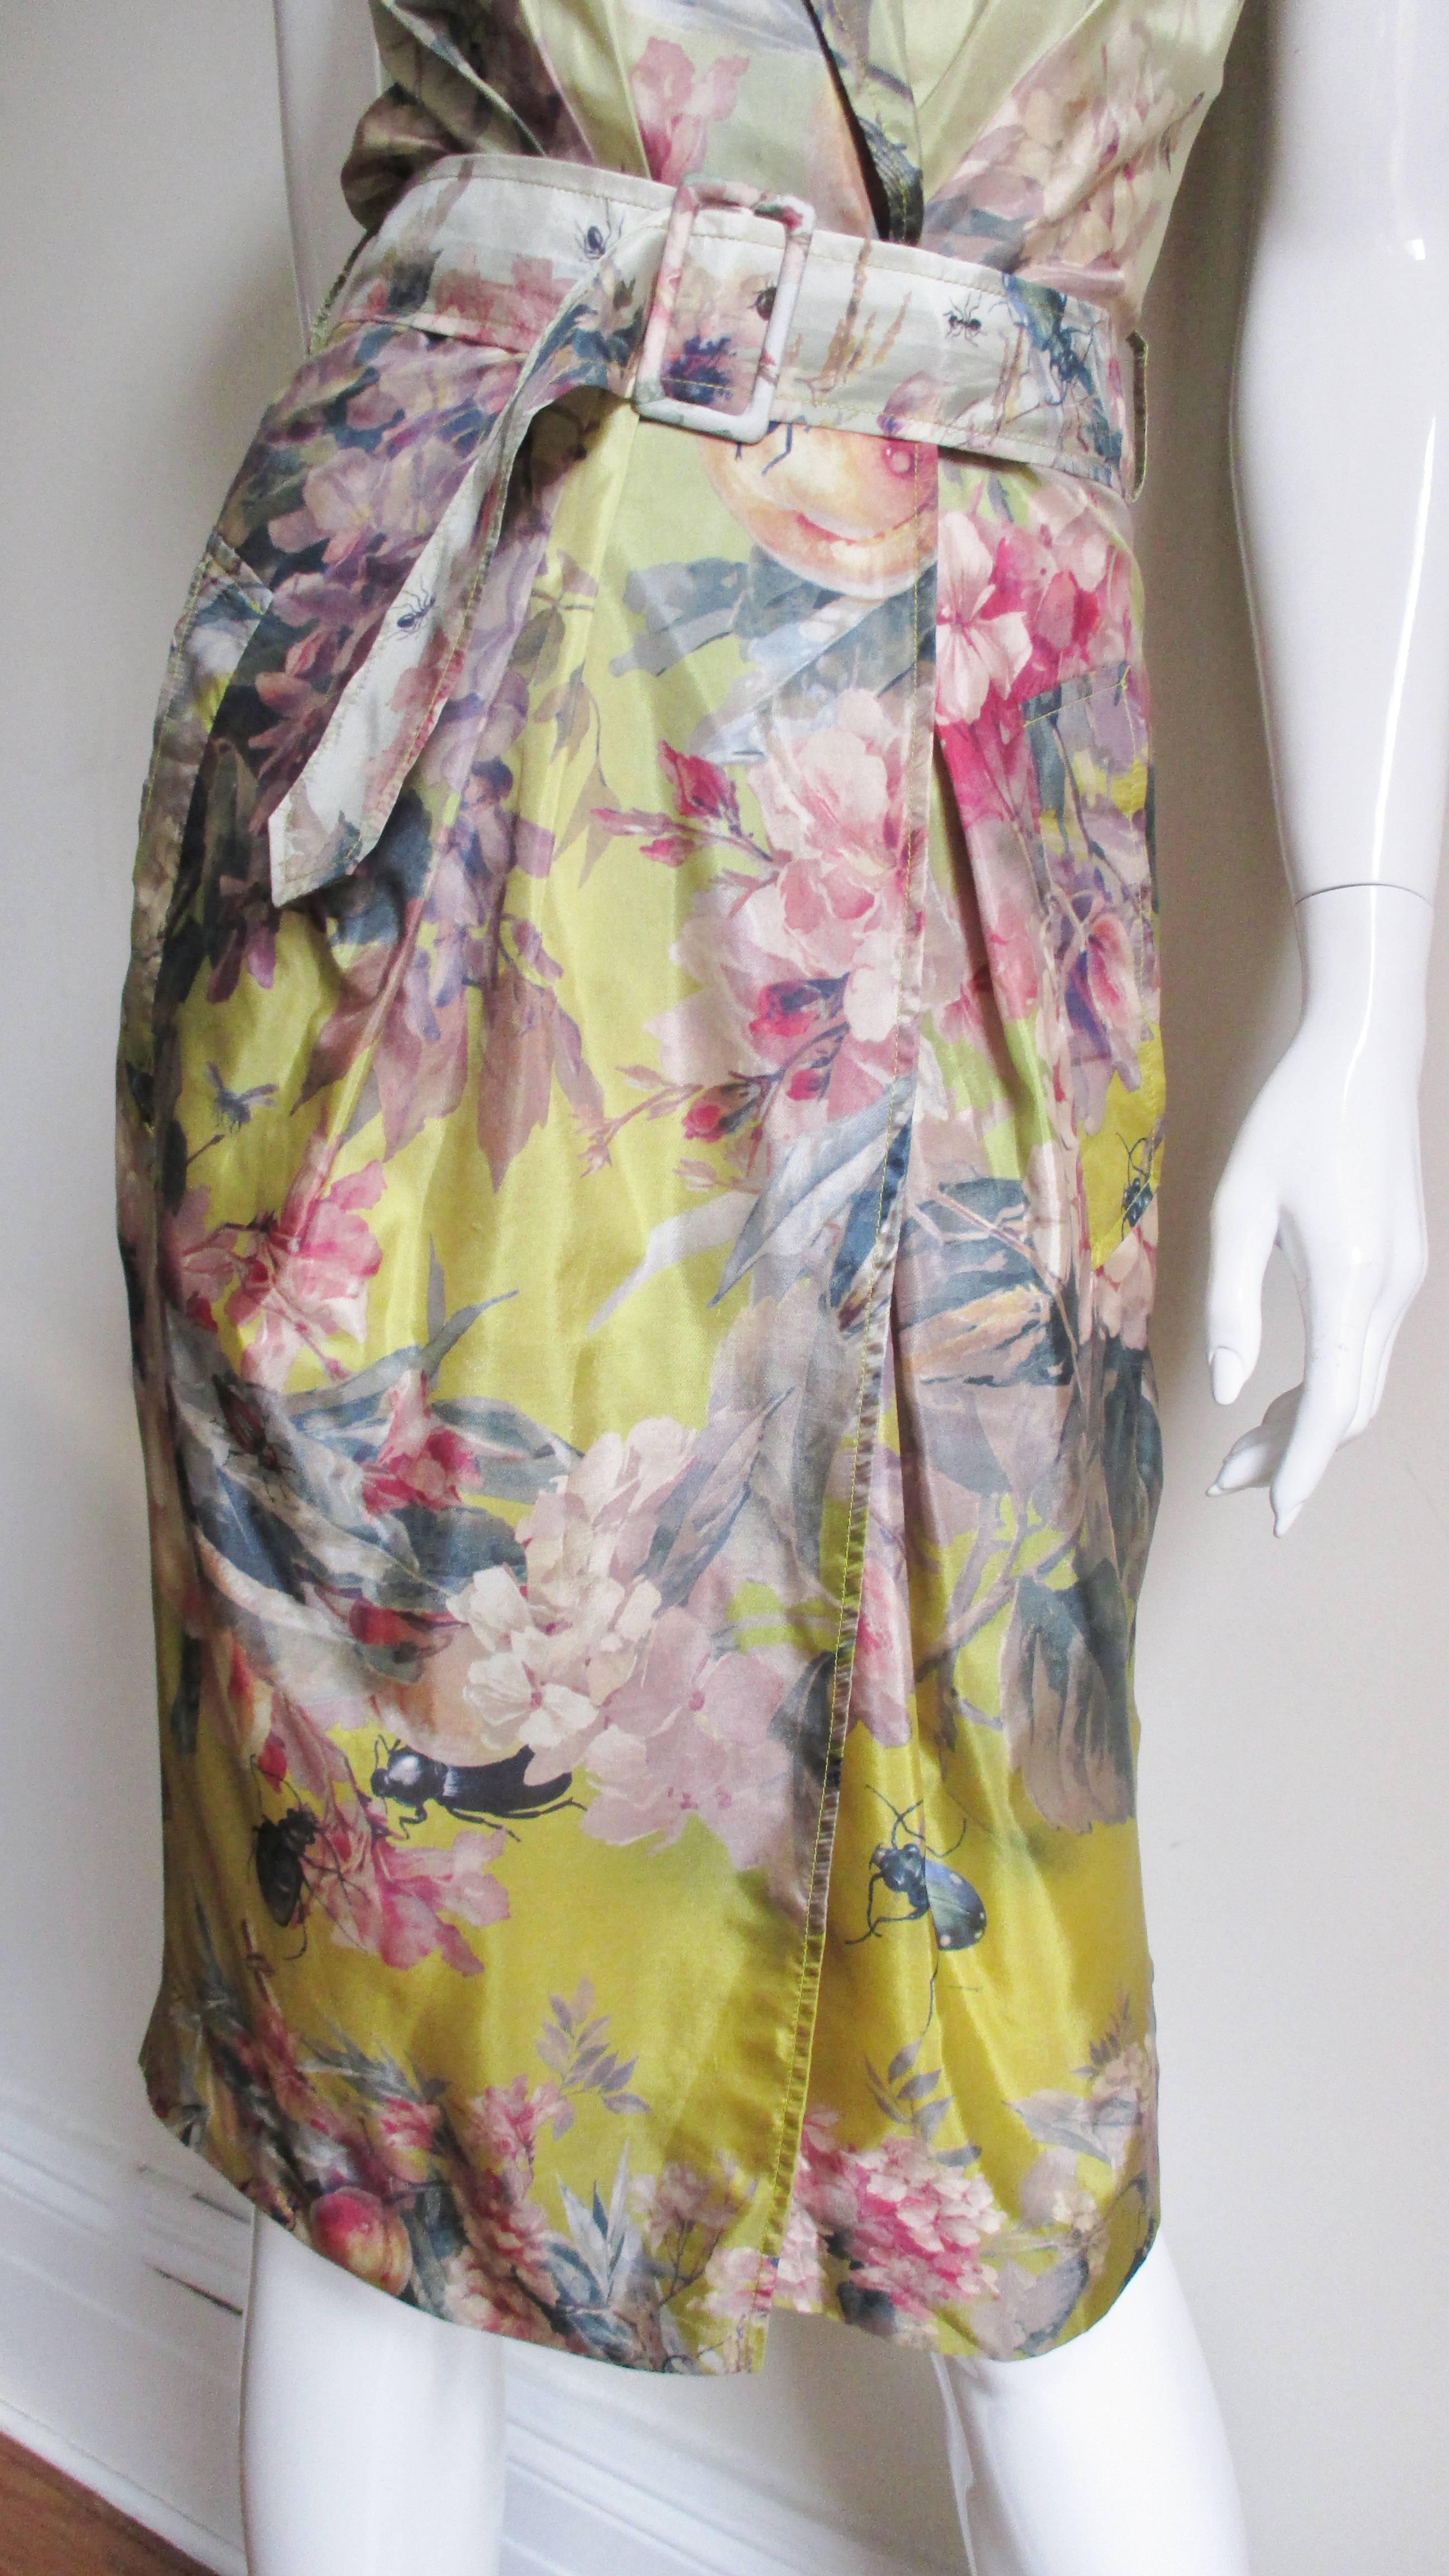 Jean Paul Gaultier Ombre Silk Flower Wrap Dress In Excellent Condition For Sale In Water Mill, NY